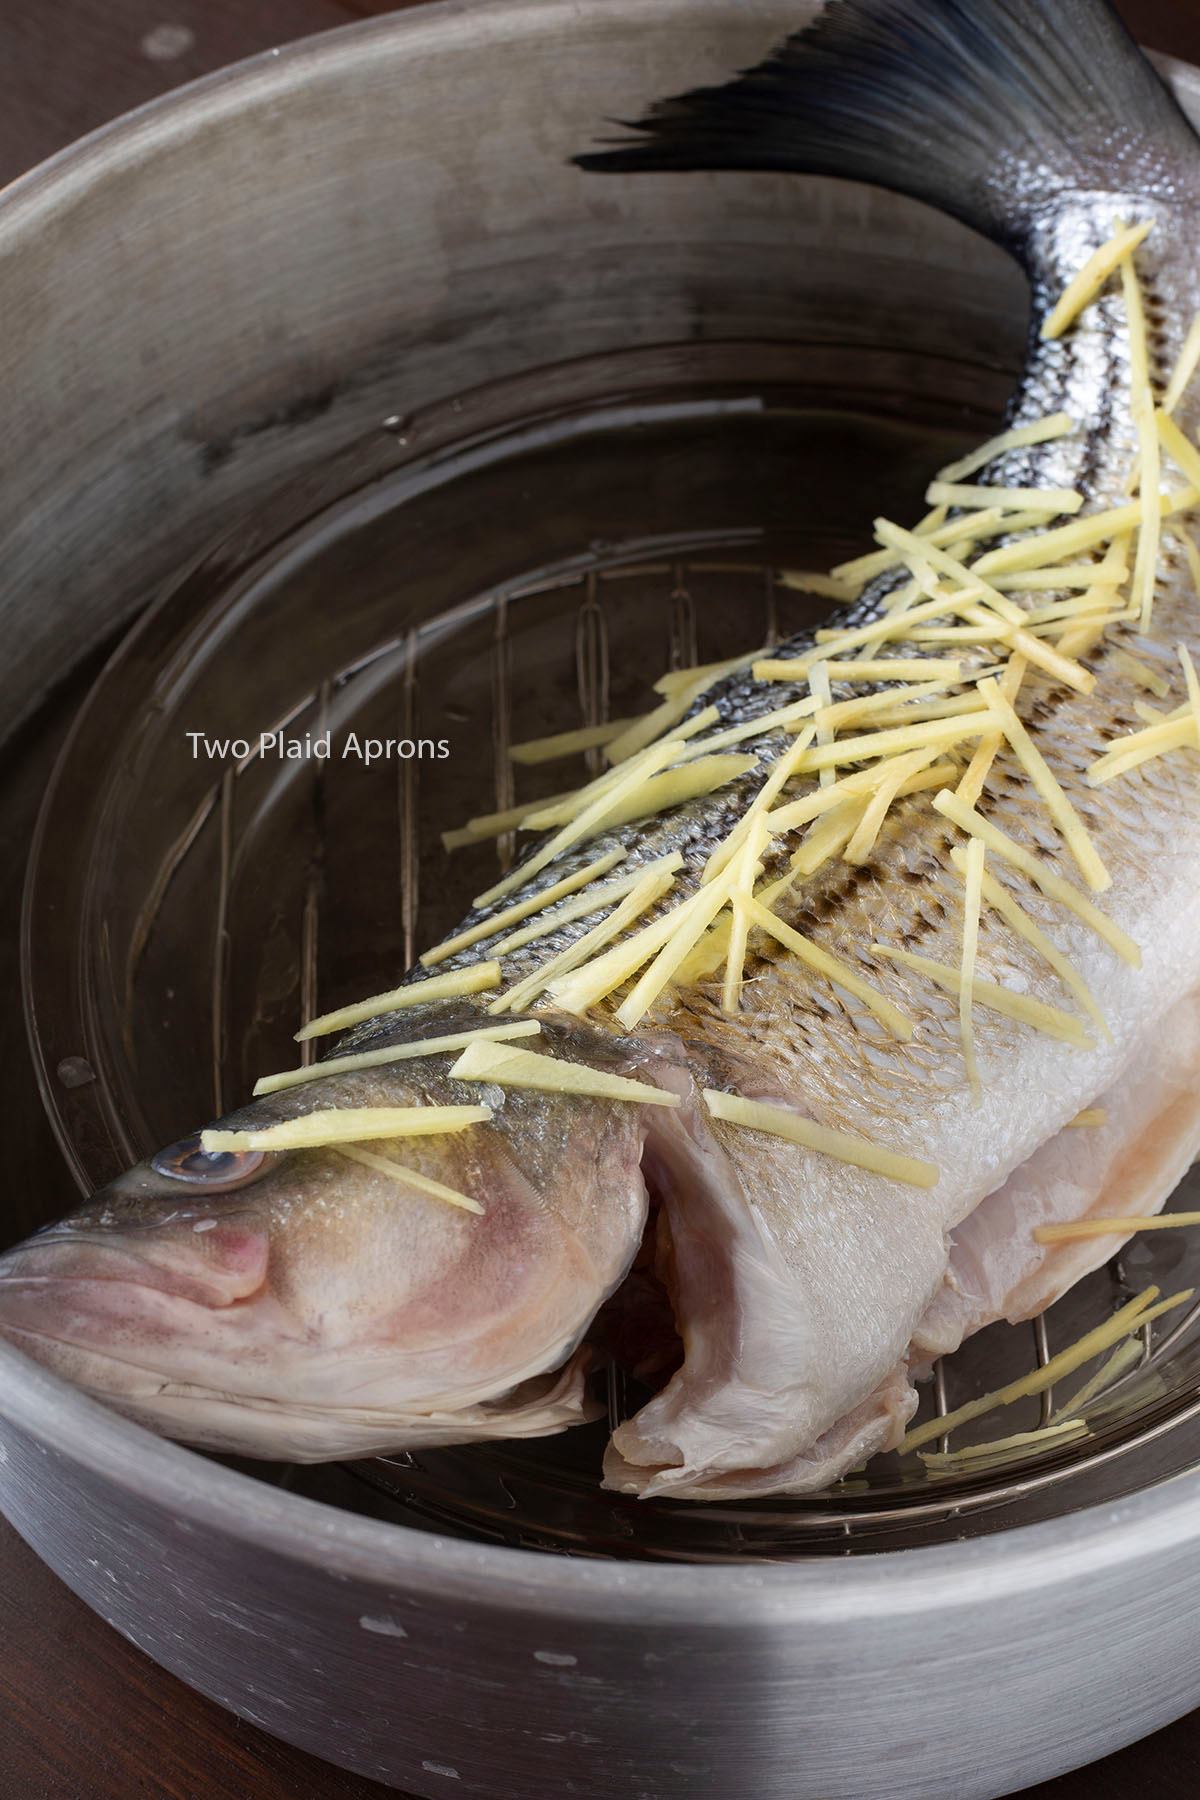 A whole striped bass topped with julienned ginger, in a pot ready for steaming.